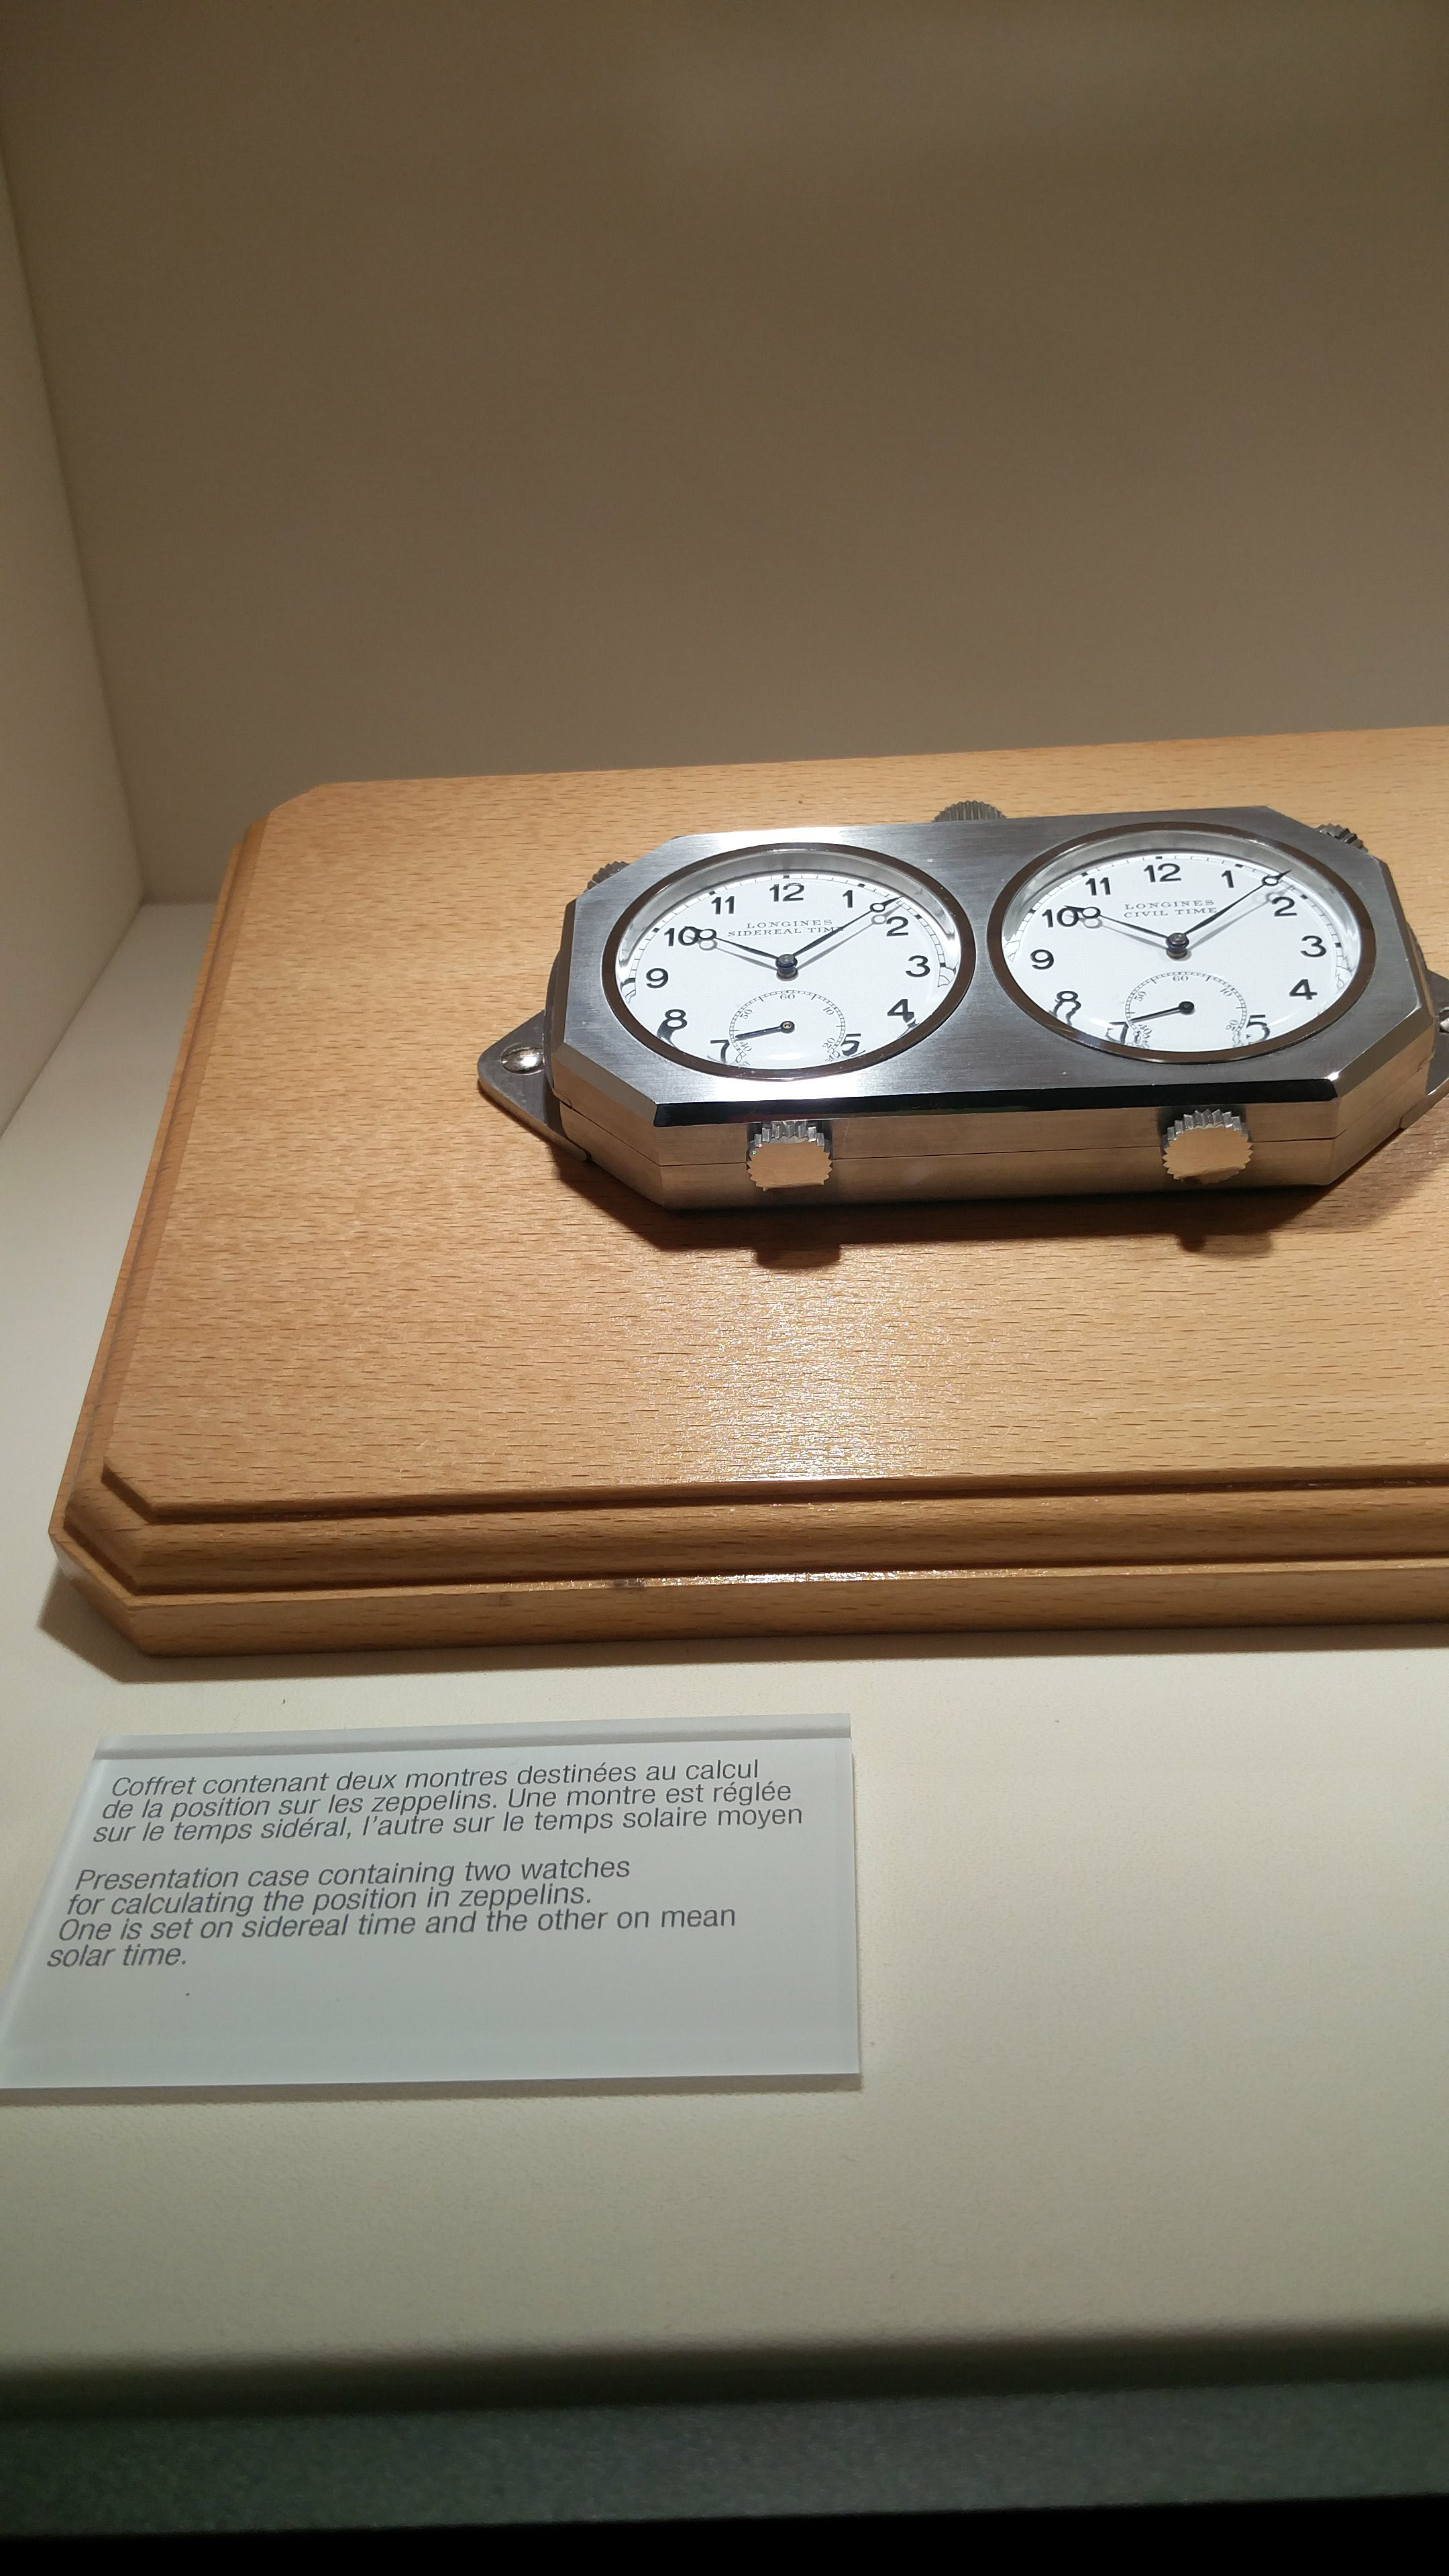 Presentation case containing two watches for calculating the position in zeppelins. One is set on sidereal time and the other on mean solar time. 